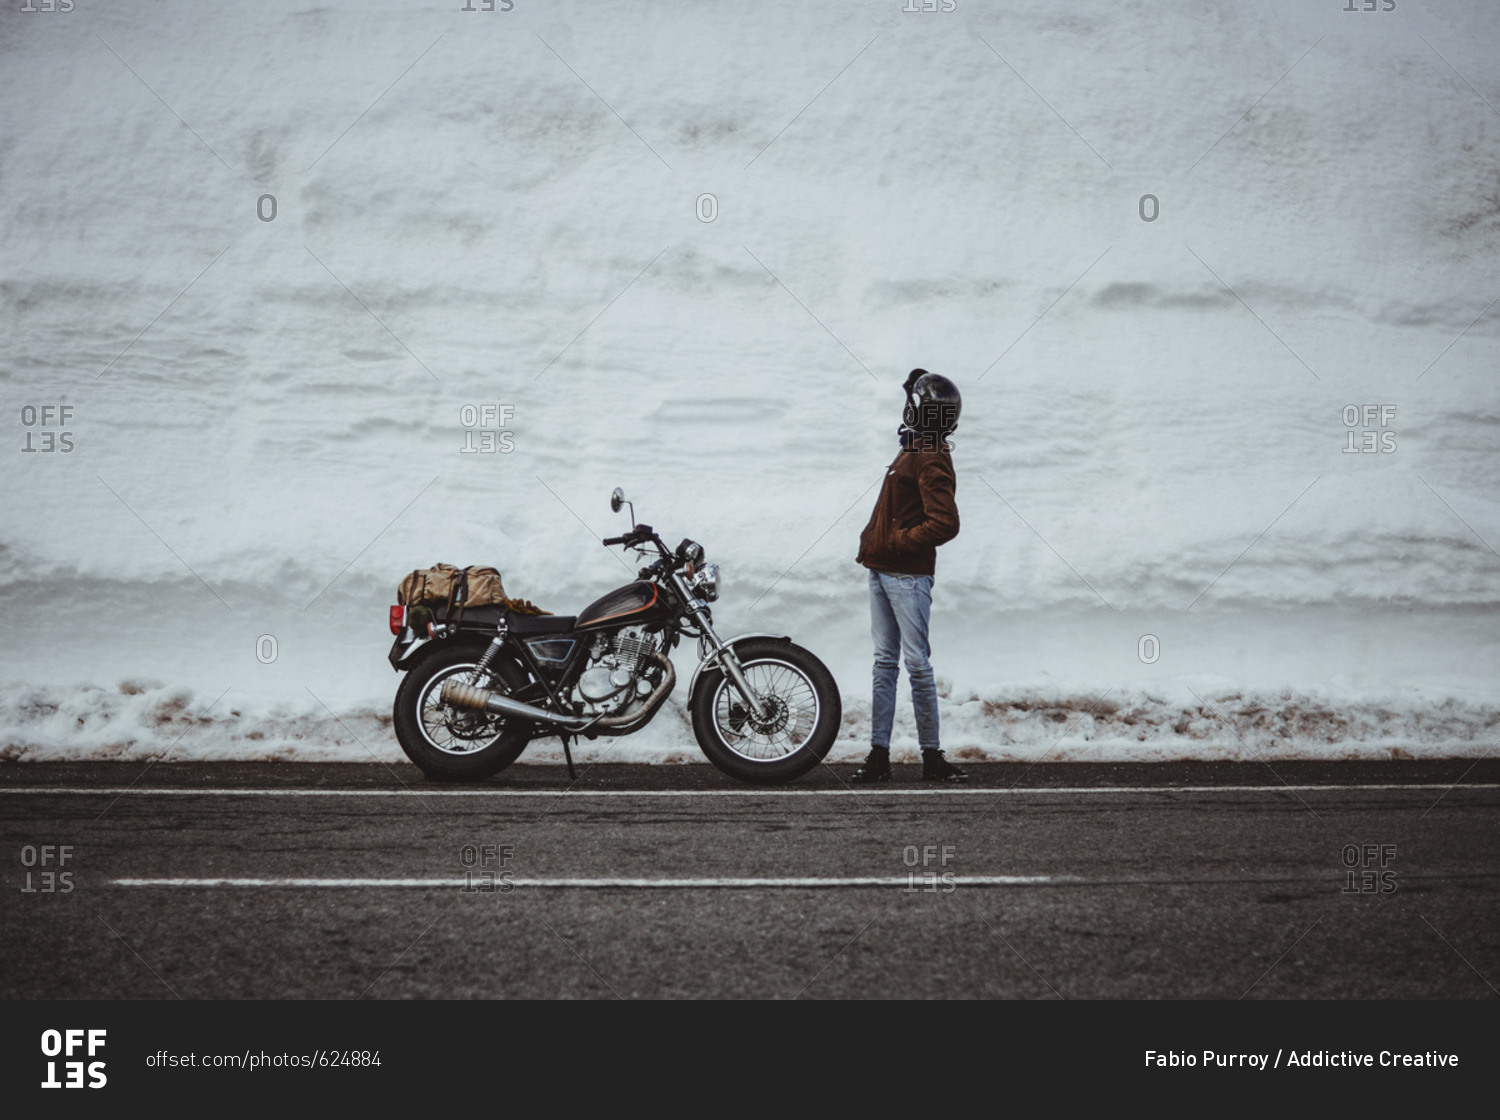 Man with motorcycle in snowy road